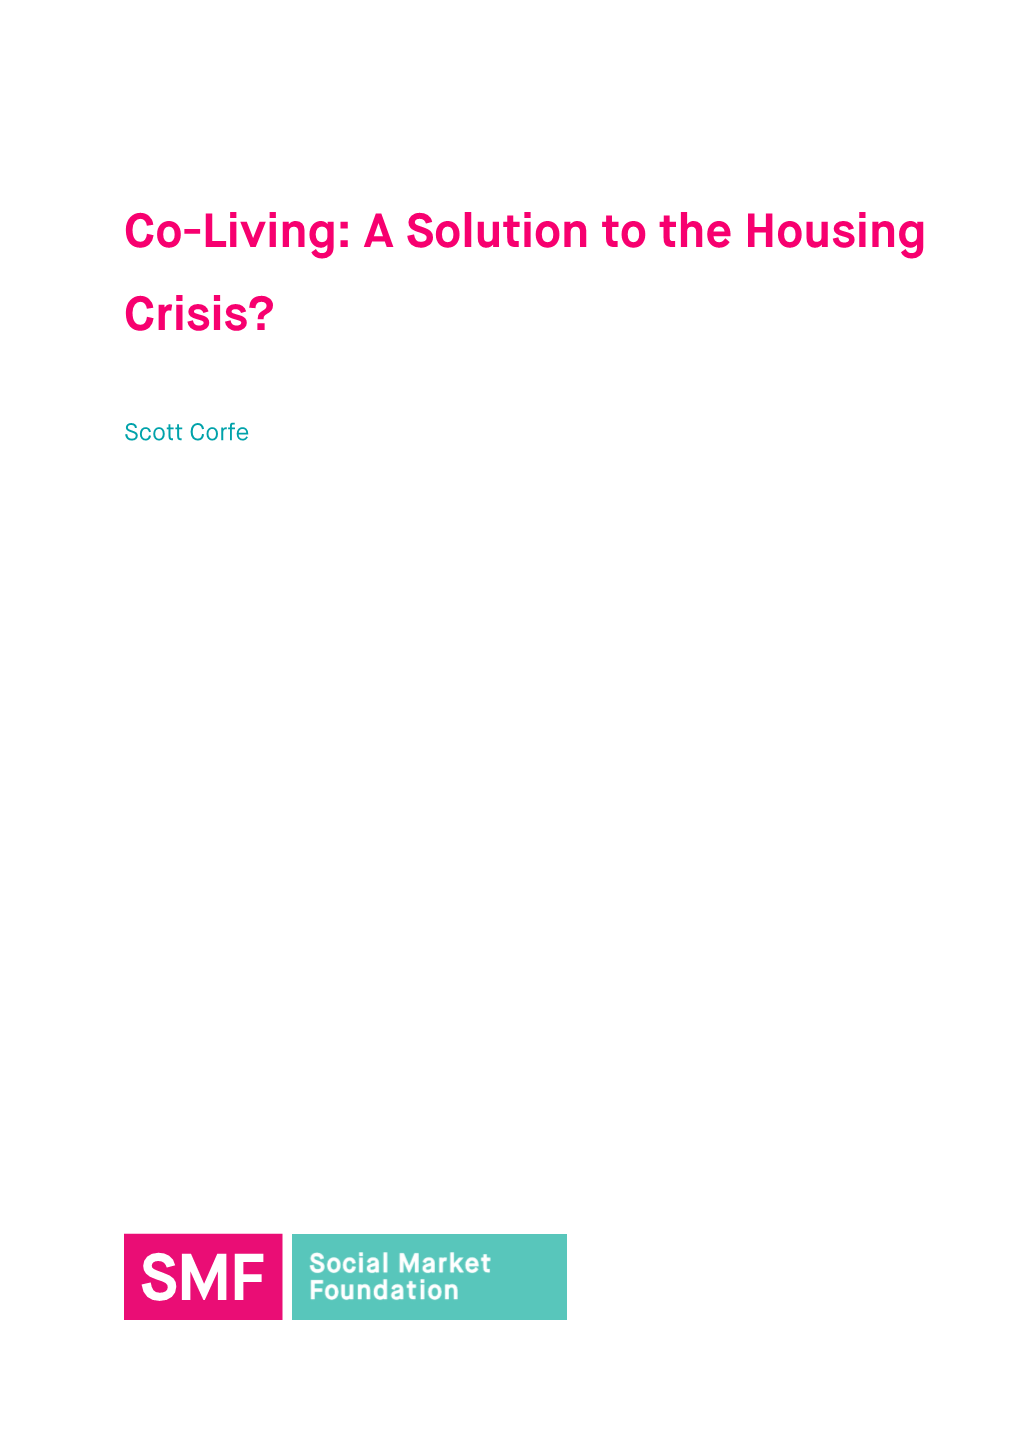 Co-Living: a Solution to the Housing Crisis?